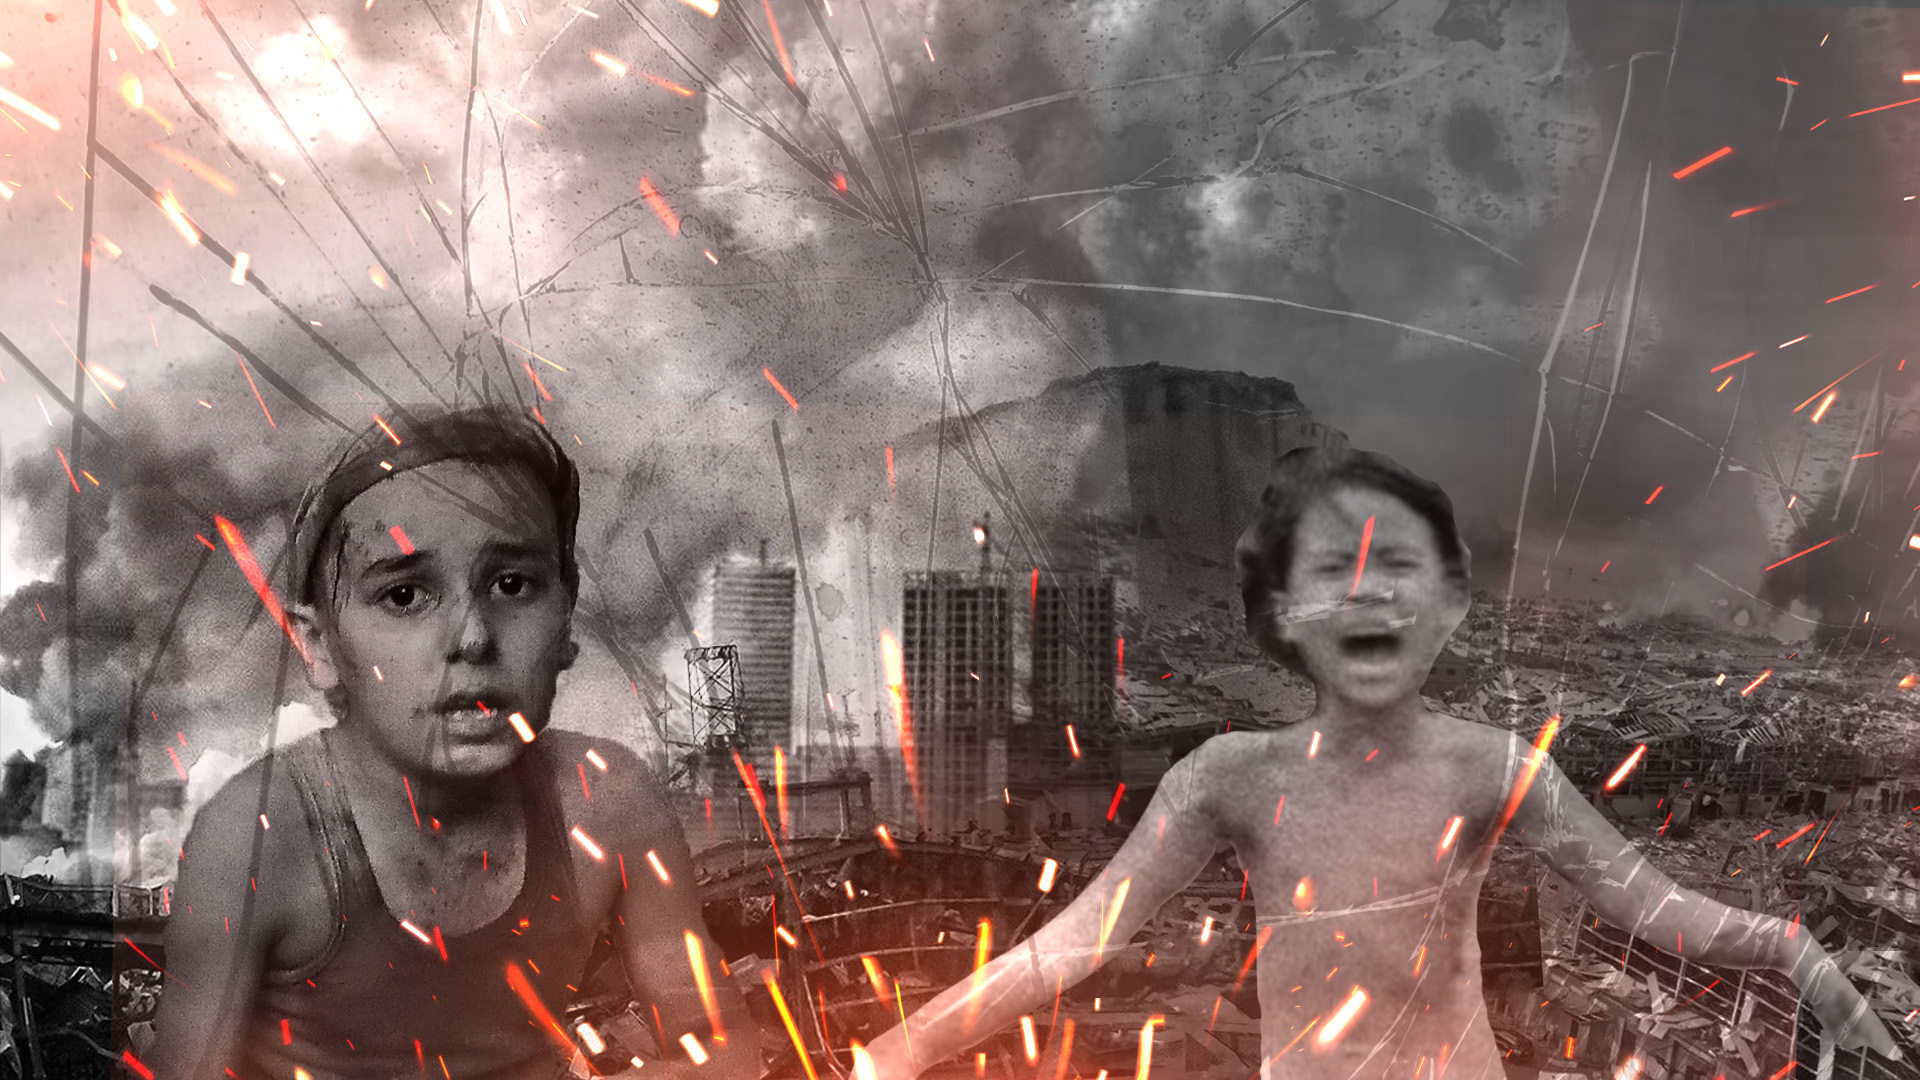 ‘Everyone looked like Phan Thi Kim Phuc, the Napalm Girl. They were screaming, walking or running towards me’ (Illustration by Mohamad Elaasar)